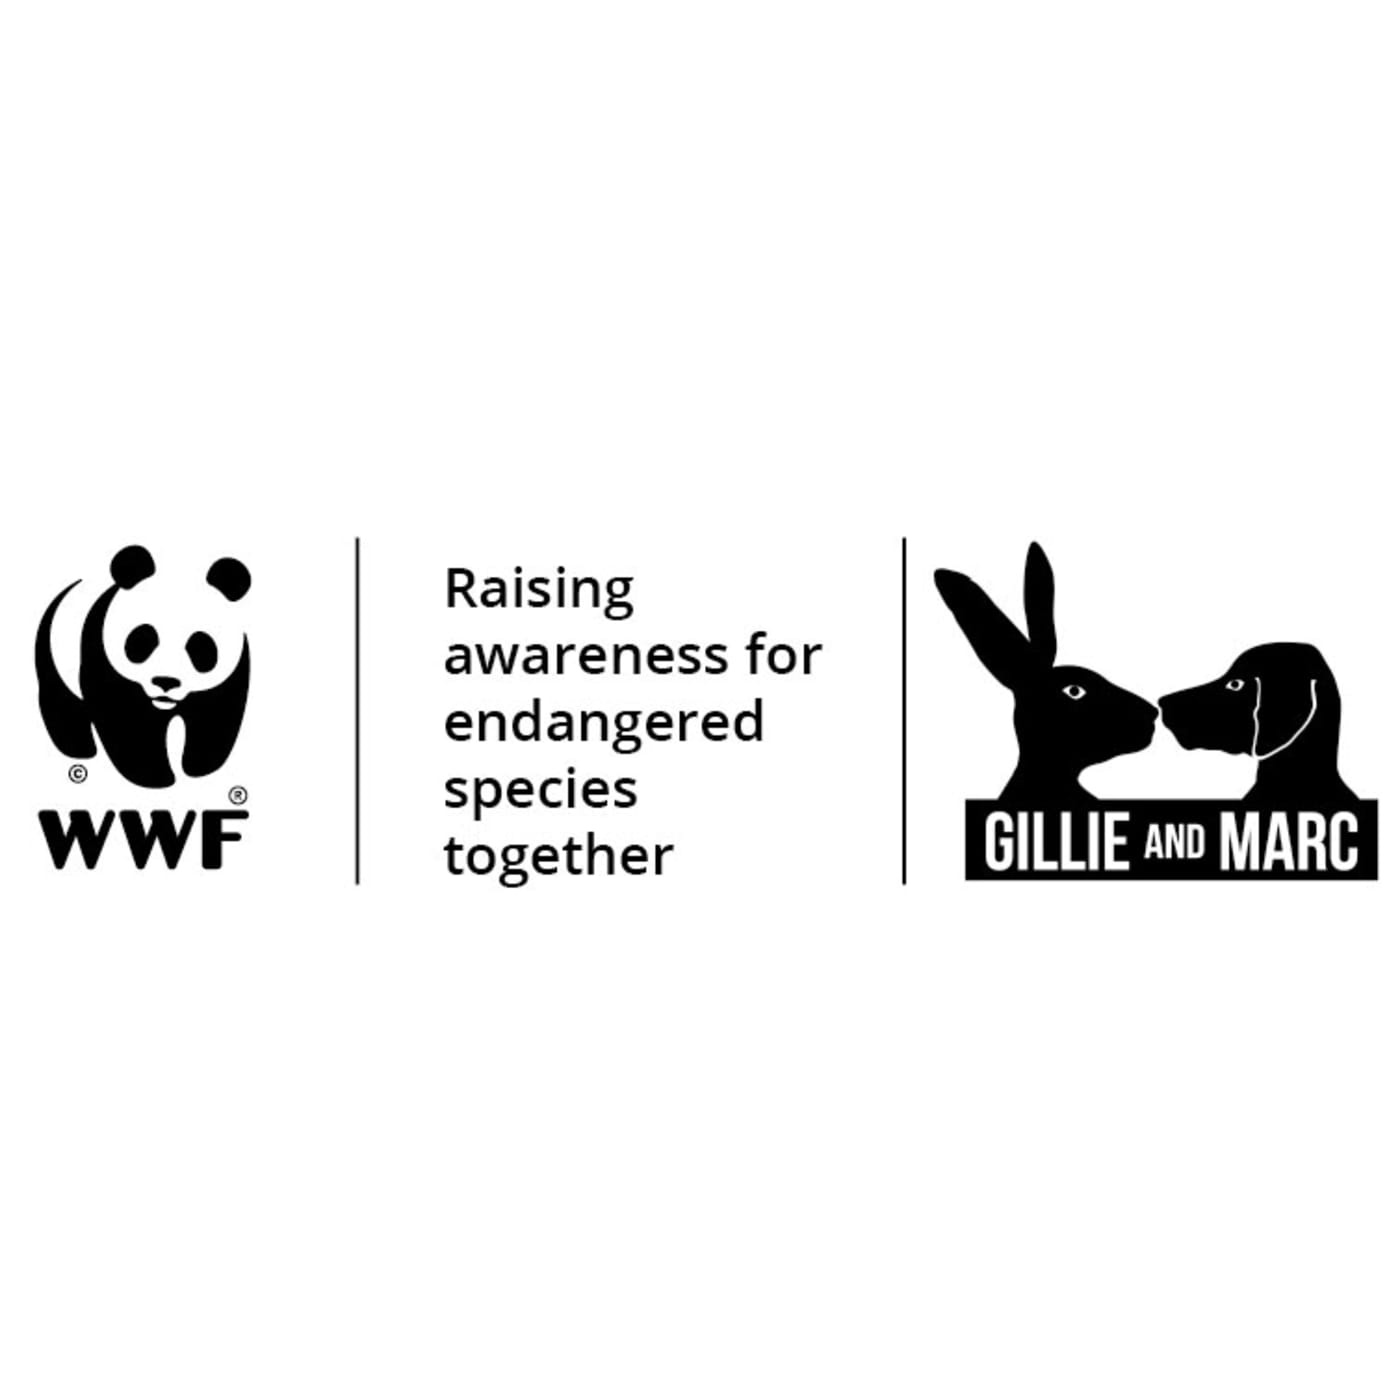 WWF and Gillie and Marc partnership logo